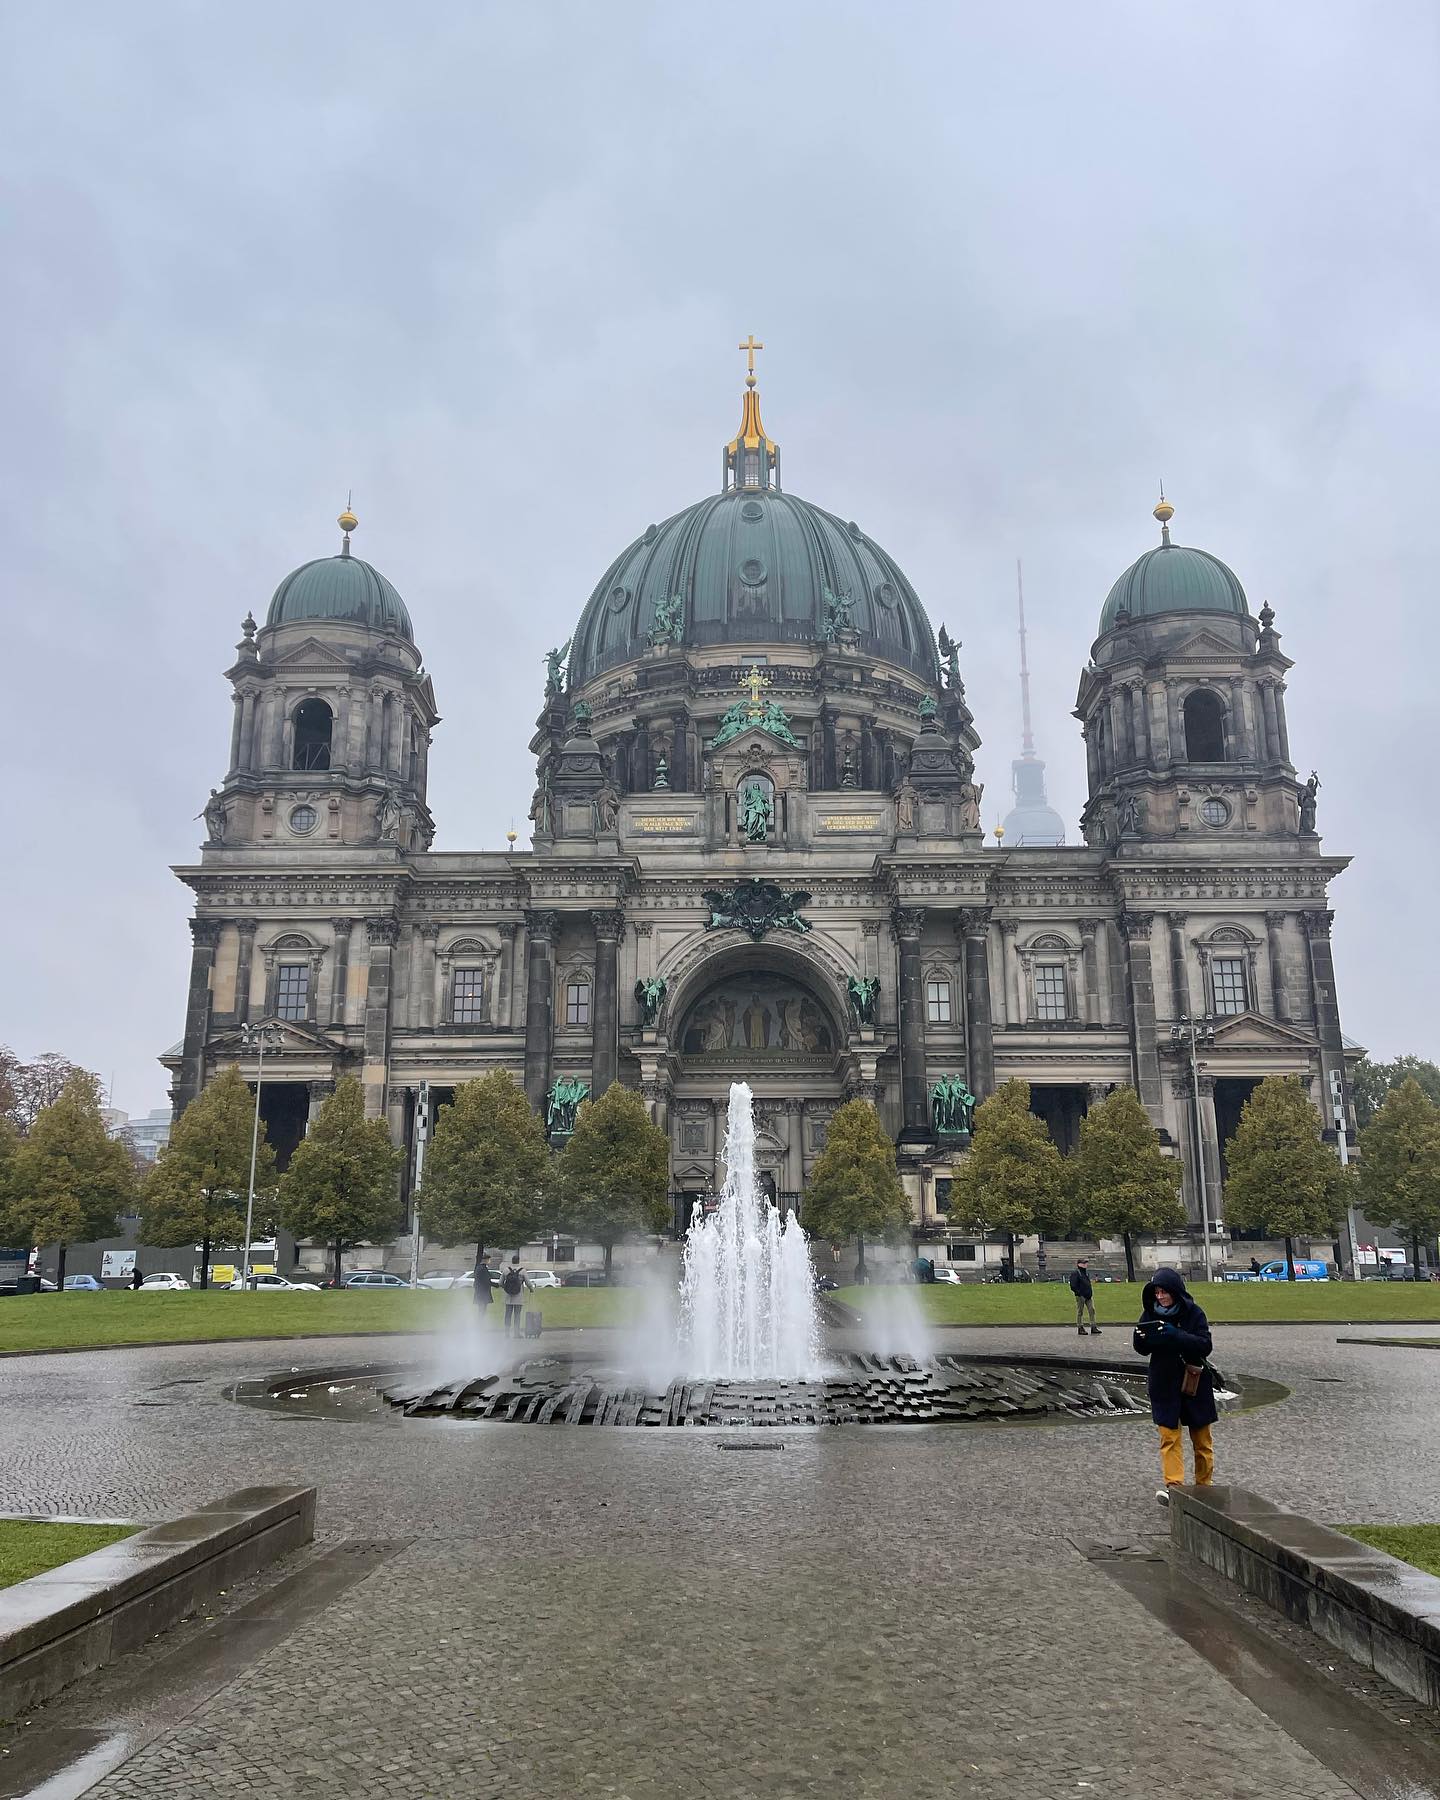 Photo of the Berlin Cathedral (Berliner Dom) on an overcast day with the fountain in the foreground and a solitary person standing nearby, with the TV Tower faintly visible in the background.